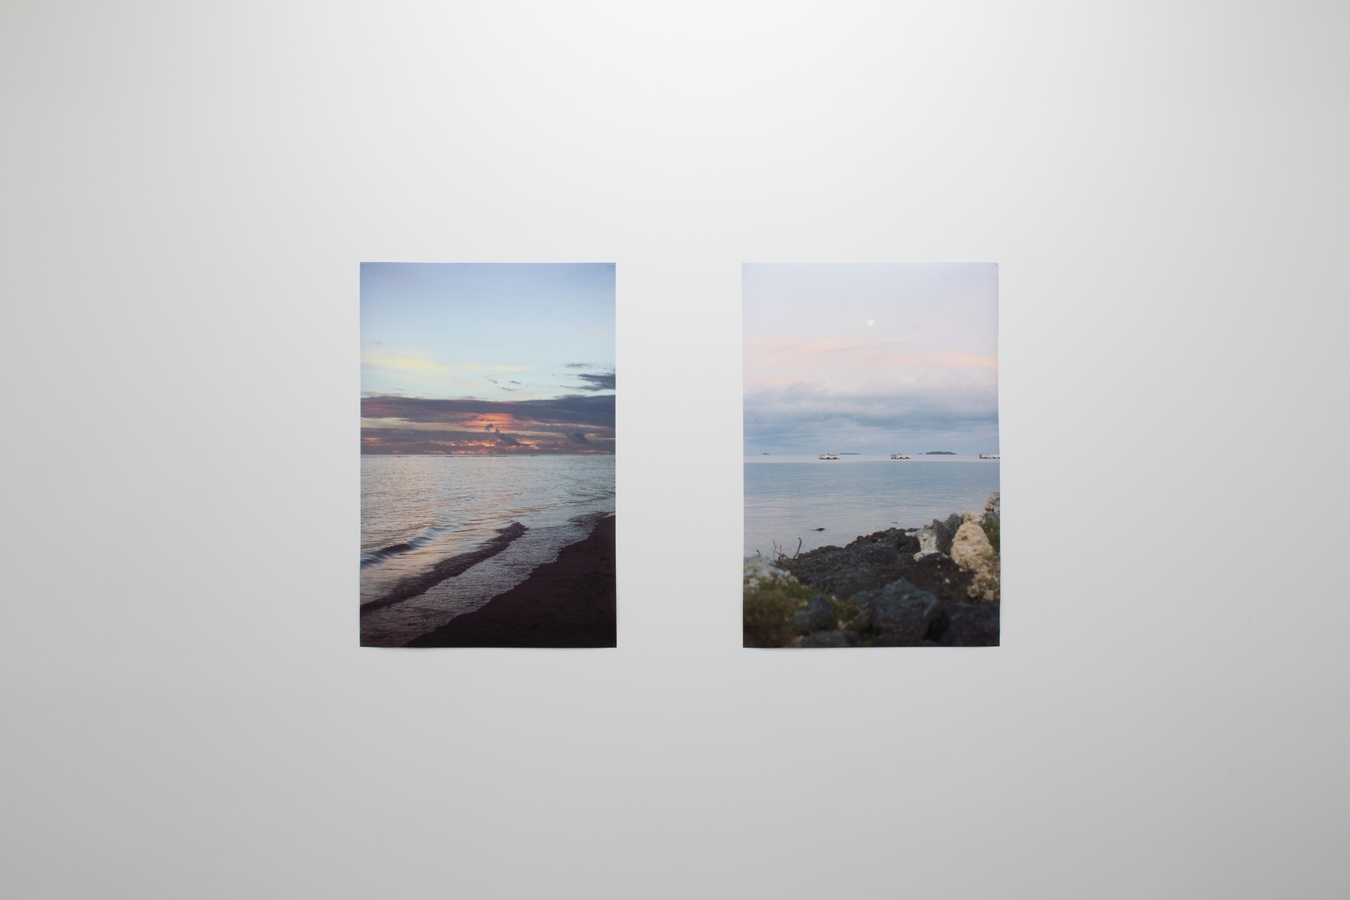 Left: Emily Parr, Towards Lotofaga (Dawn) (installation view), 2019. Right: Emily Parr, Tongatapu (Full Moon) (installation view), 2019. Photo: Janneth Gil.